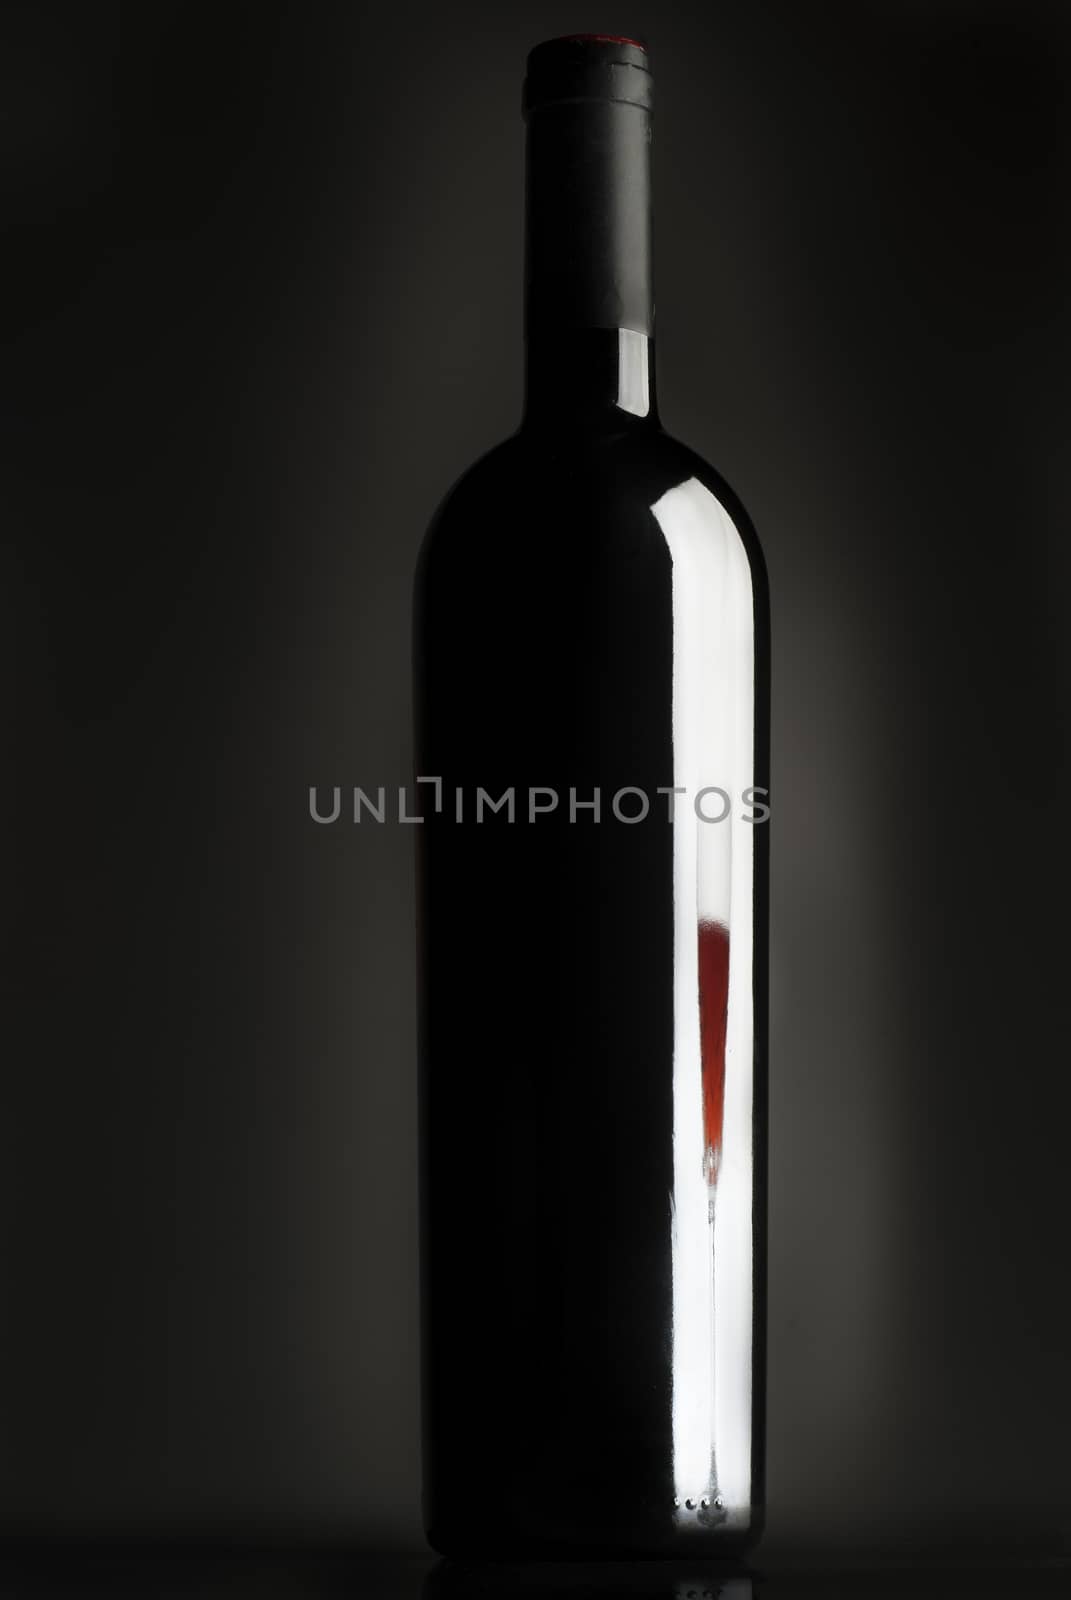 Bottle of wine, reflection of wine glass, red wine, black background